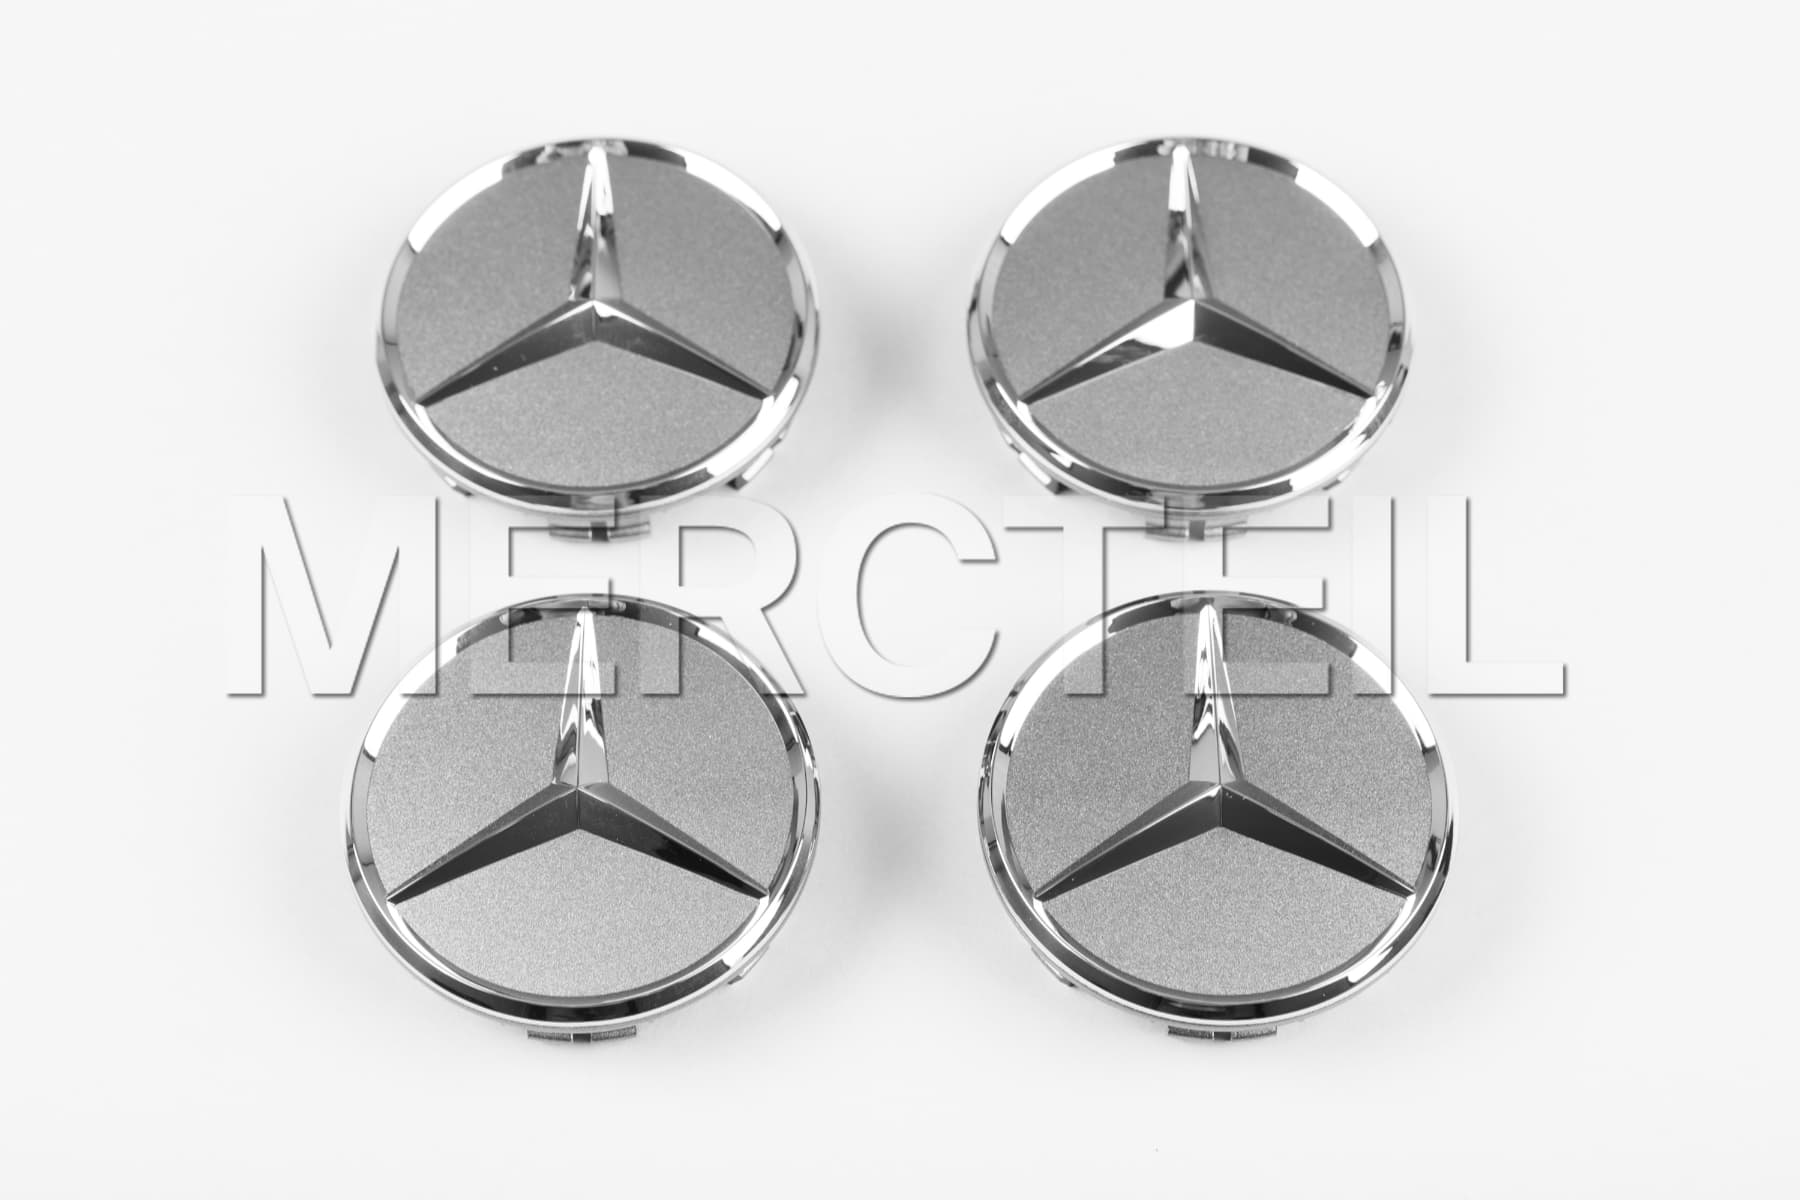 Mercedes Wheel Hubcaps Gray Raised Star Genuine Mercedes Benz (part number: A00040038007756)